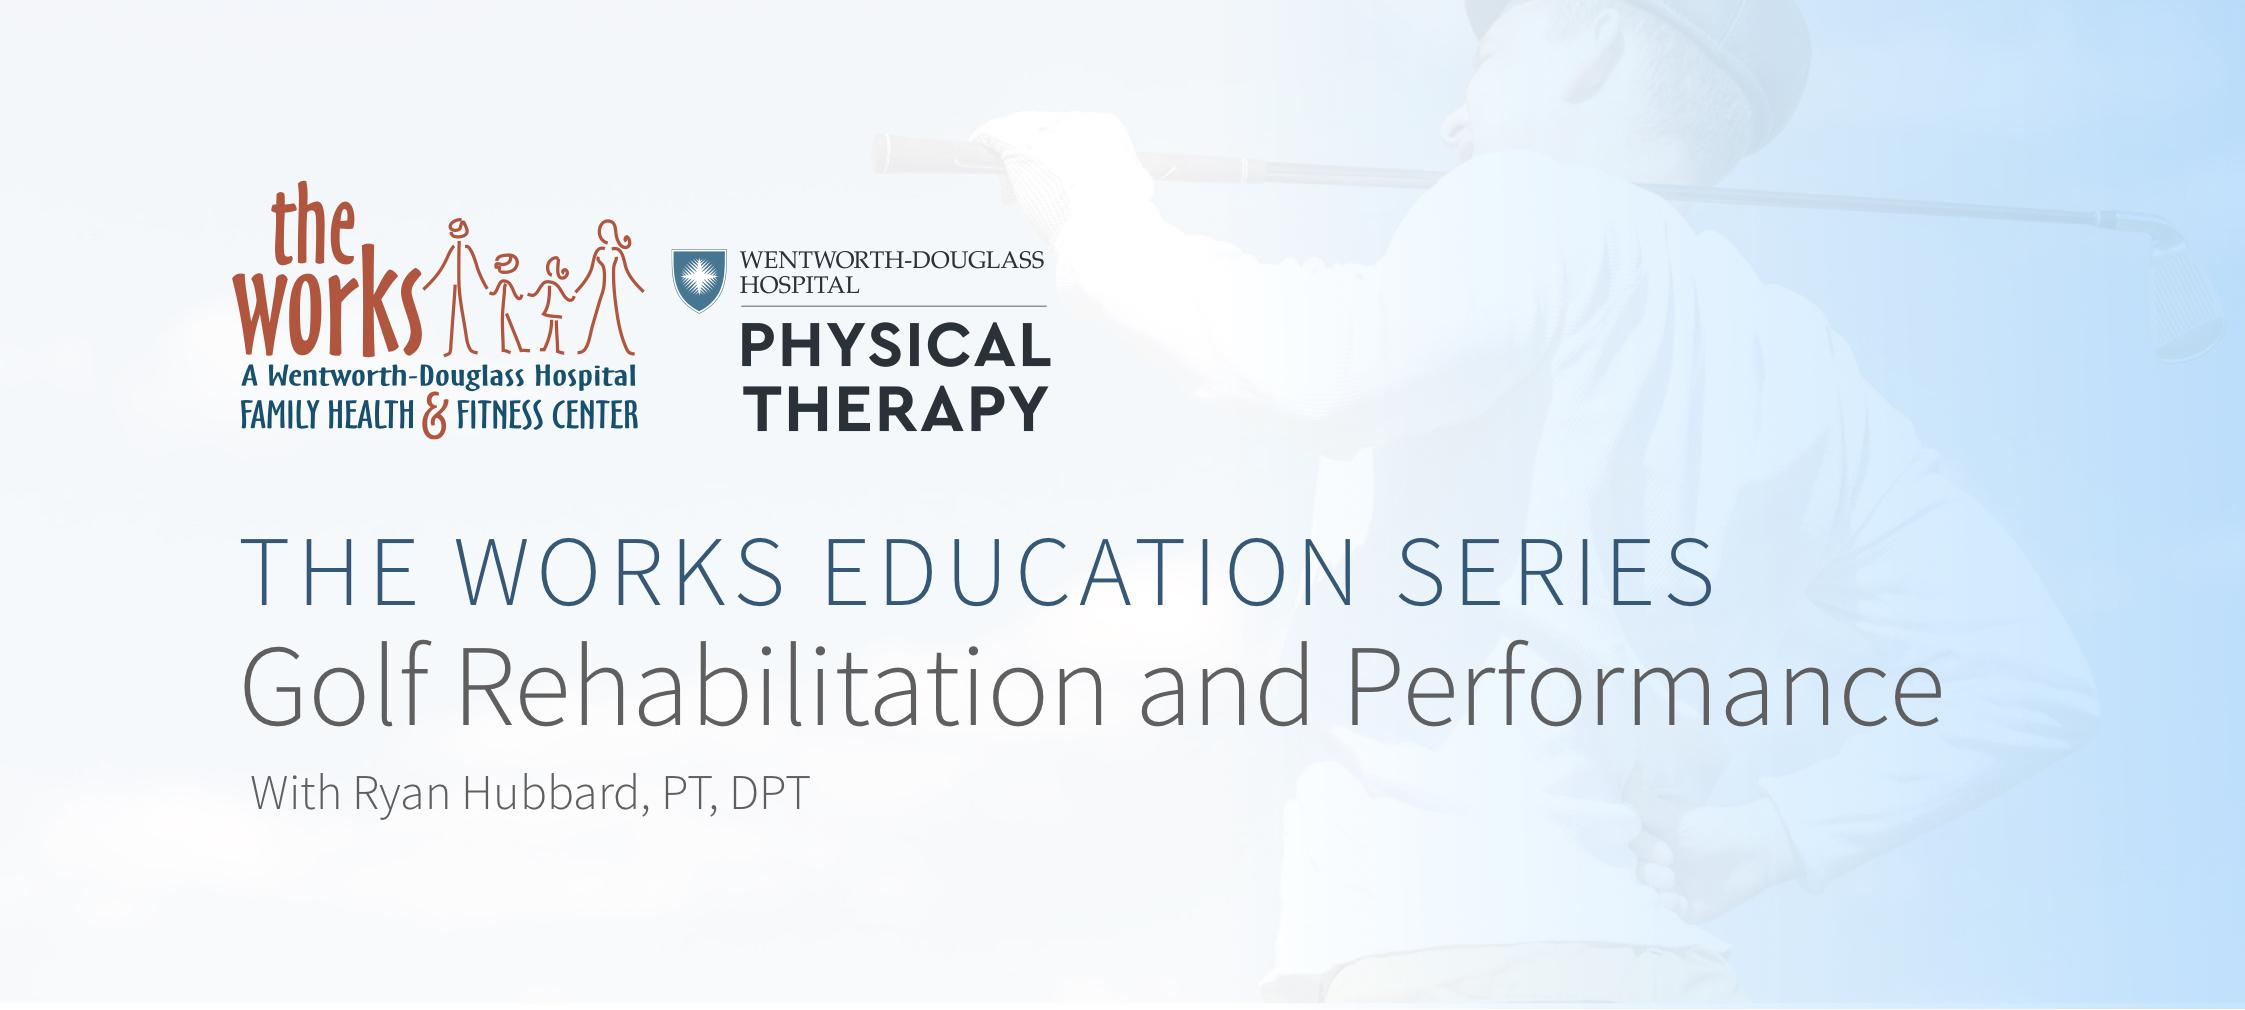 The Works Education Series: Golf Rehabilitation and Performance